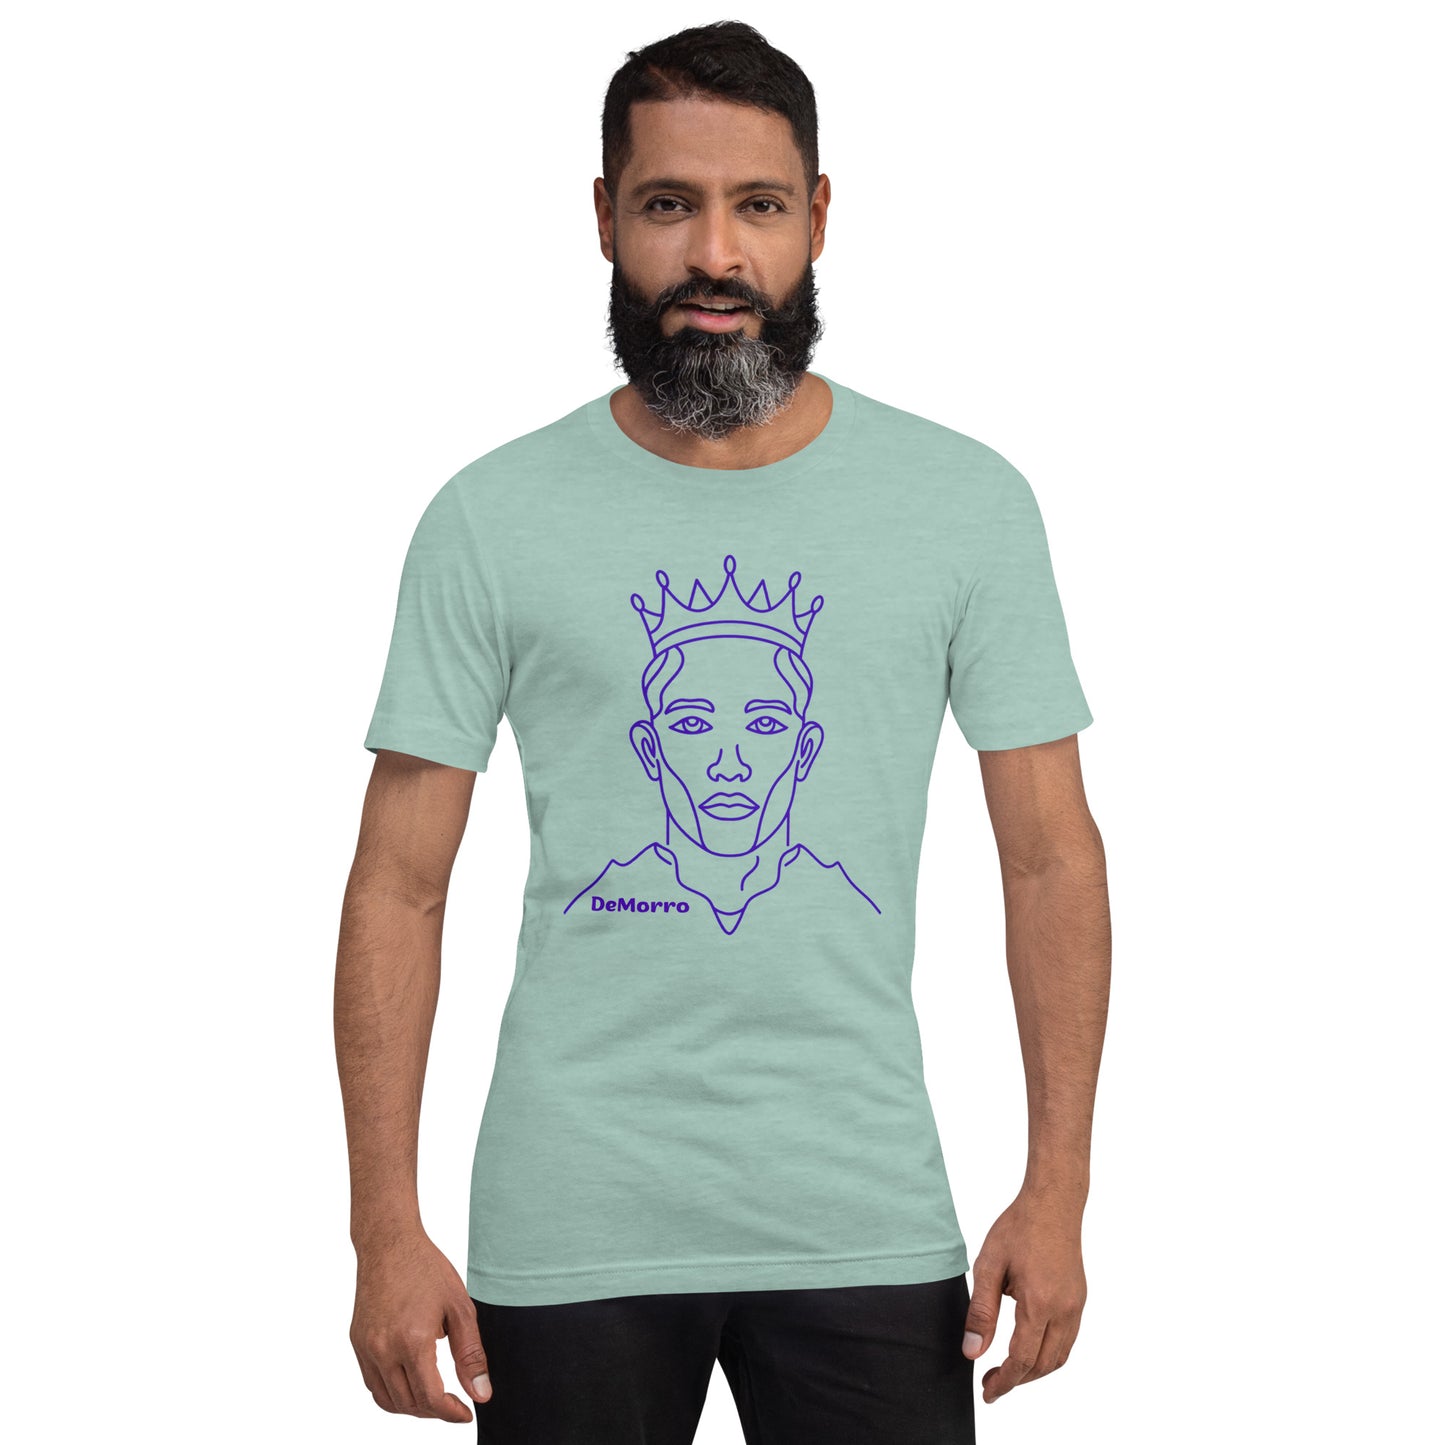 "A King is He" - Unisex t-shirt